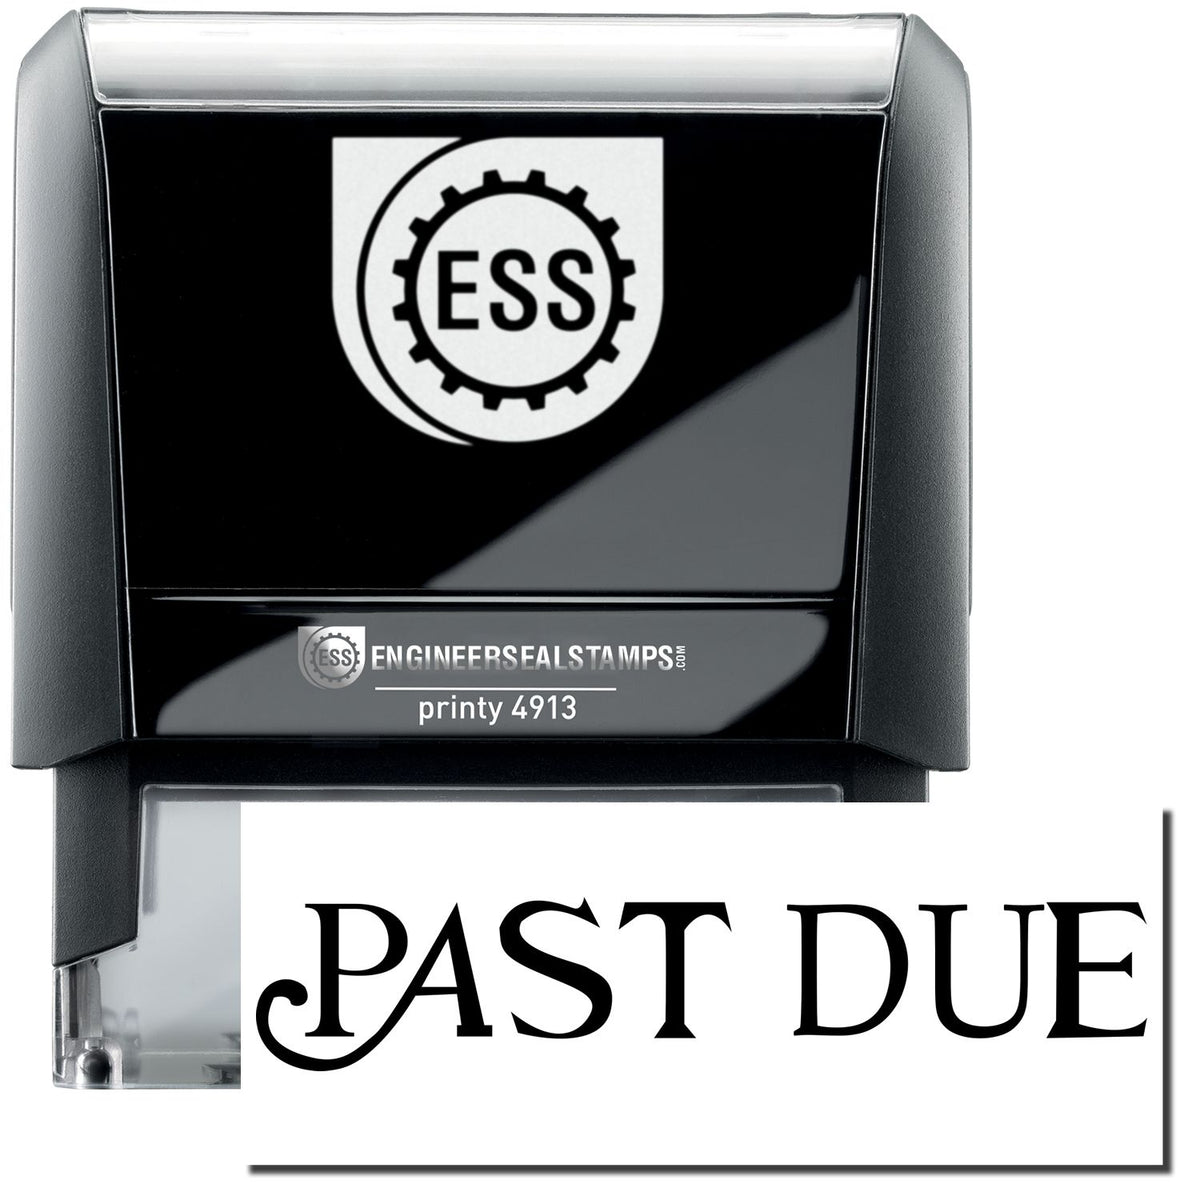 A self-inking stamp with a stamped image showing how the text &quot;PAST DUE&quot; in a large curley font is displayed by it after stamping.